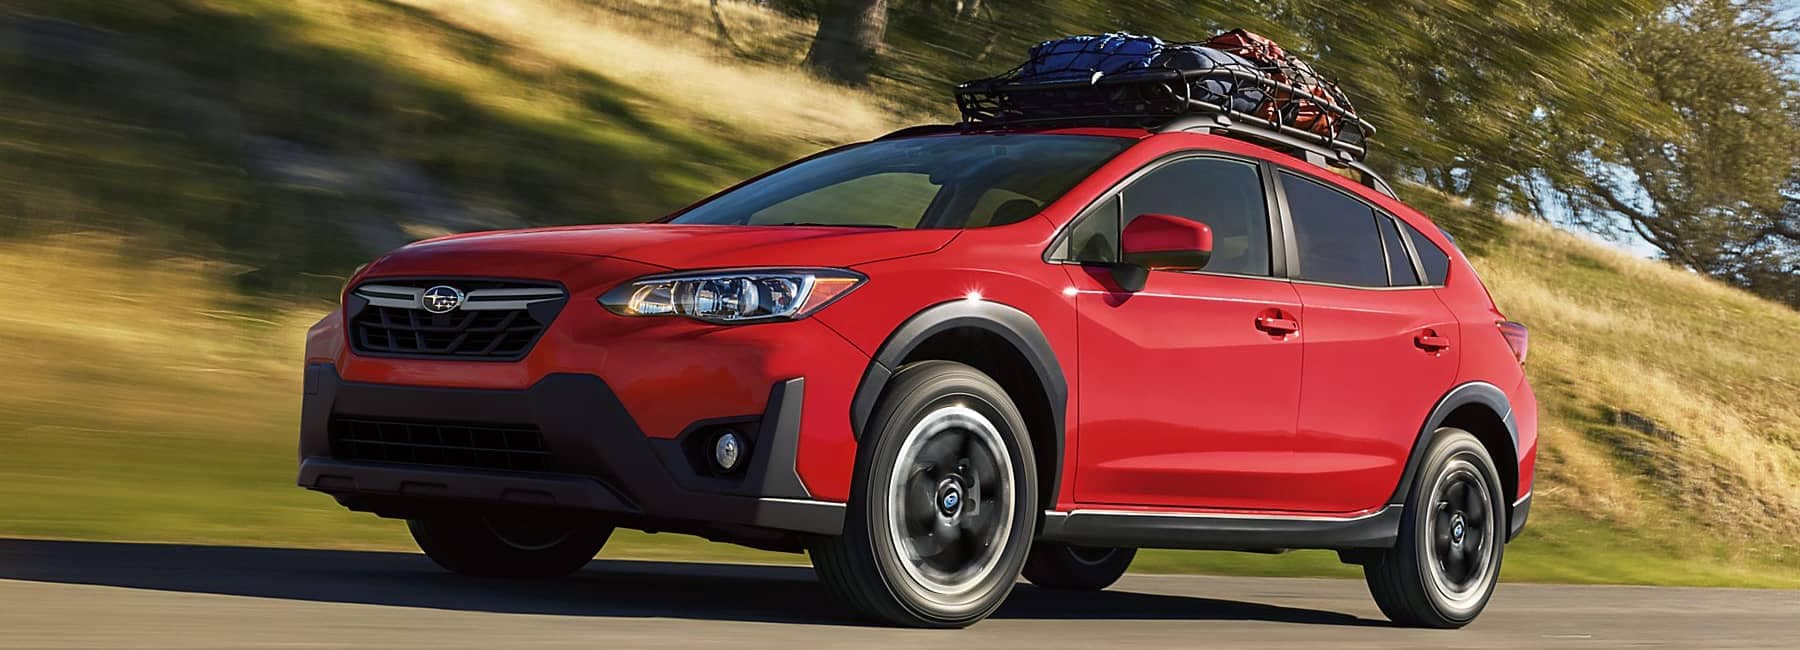 Crosstrek shown in Pure Red with accessory equipment